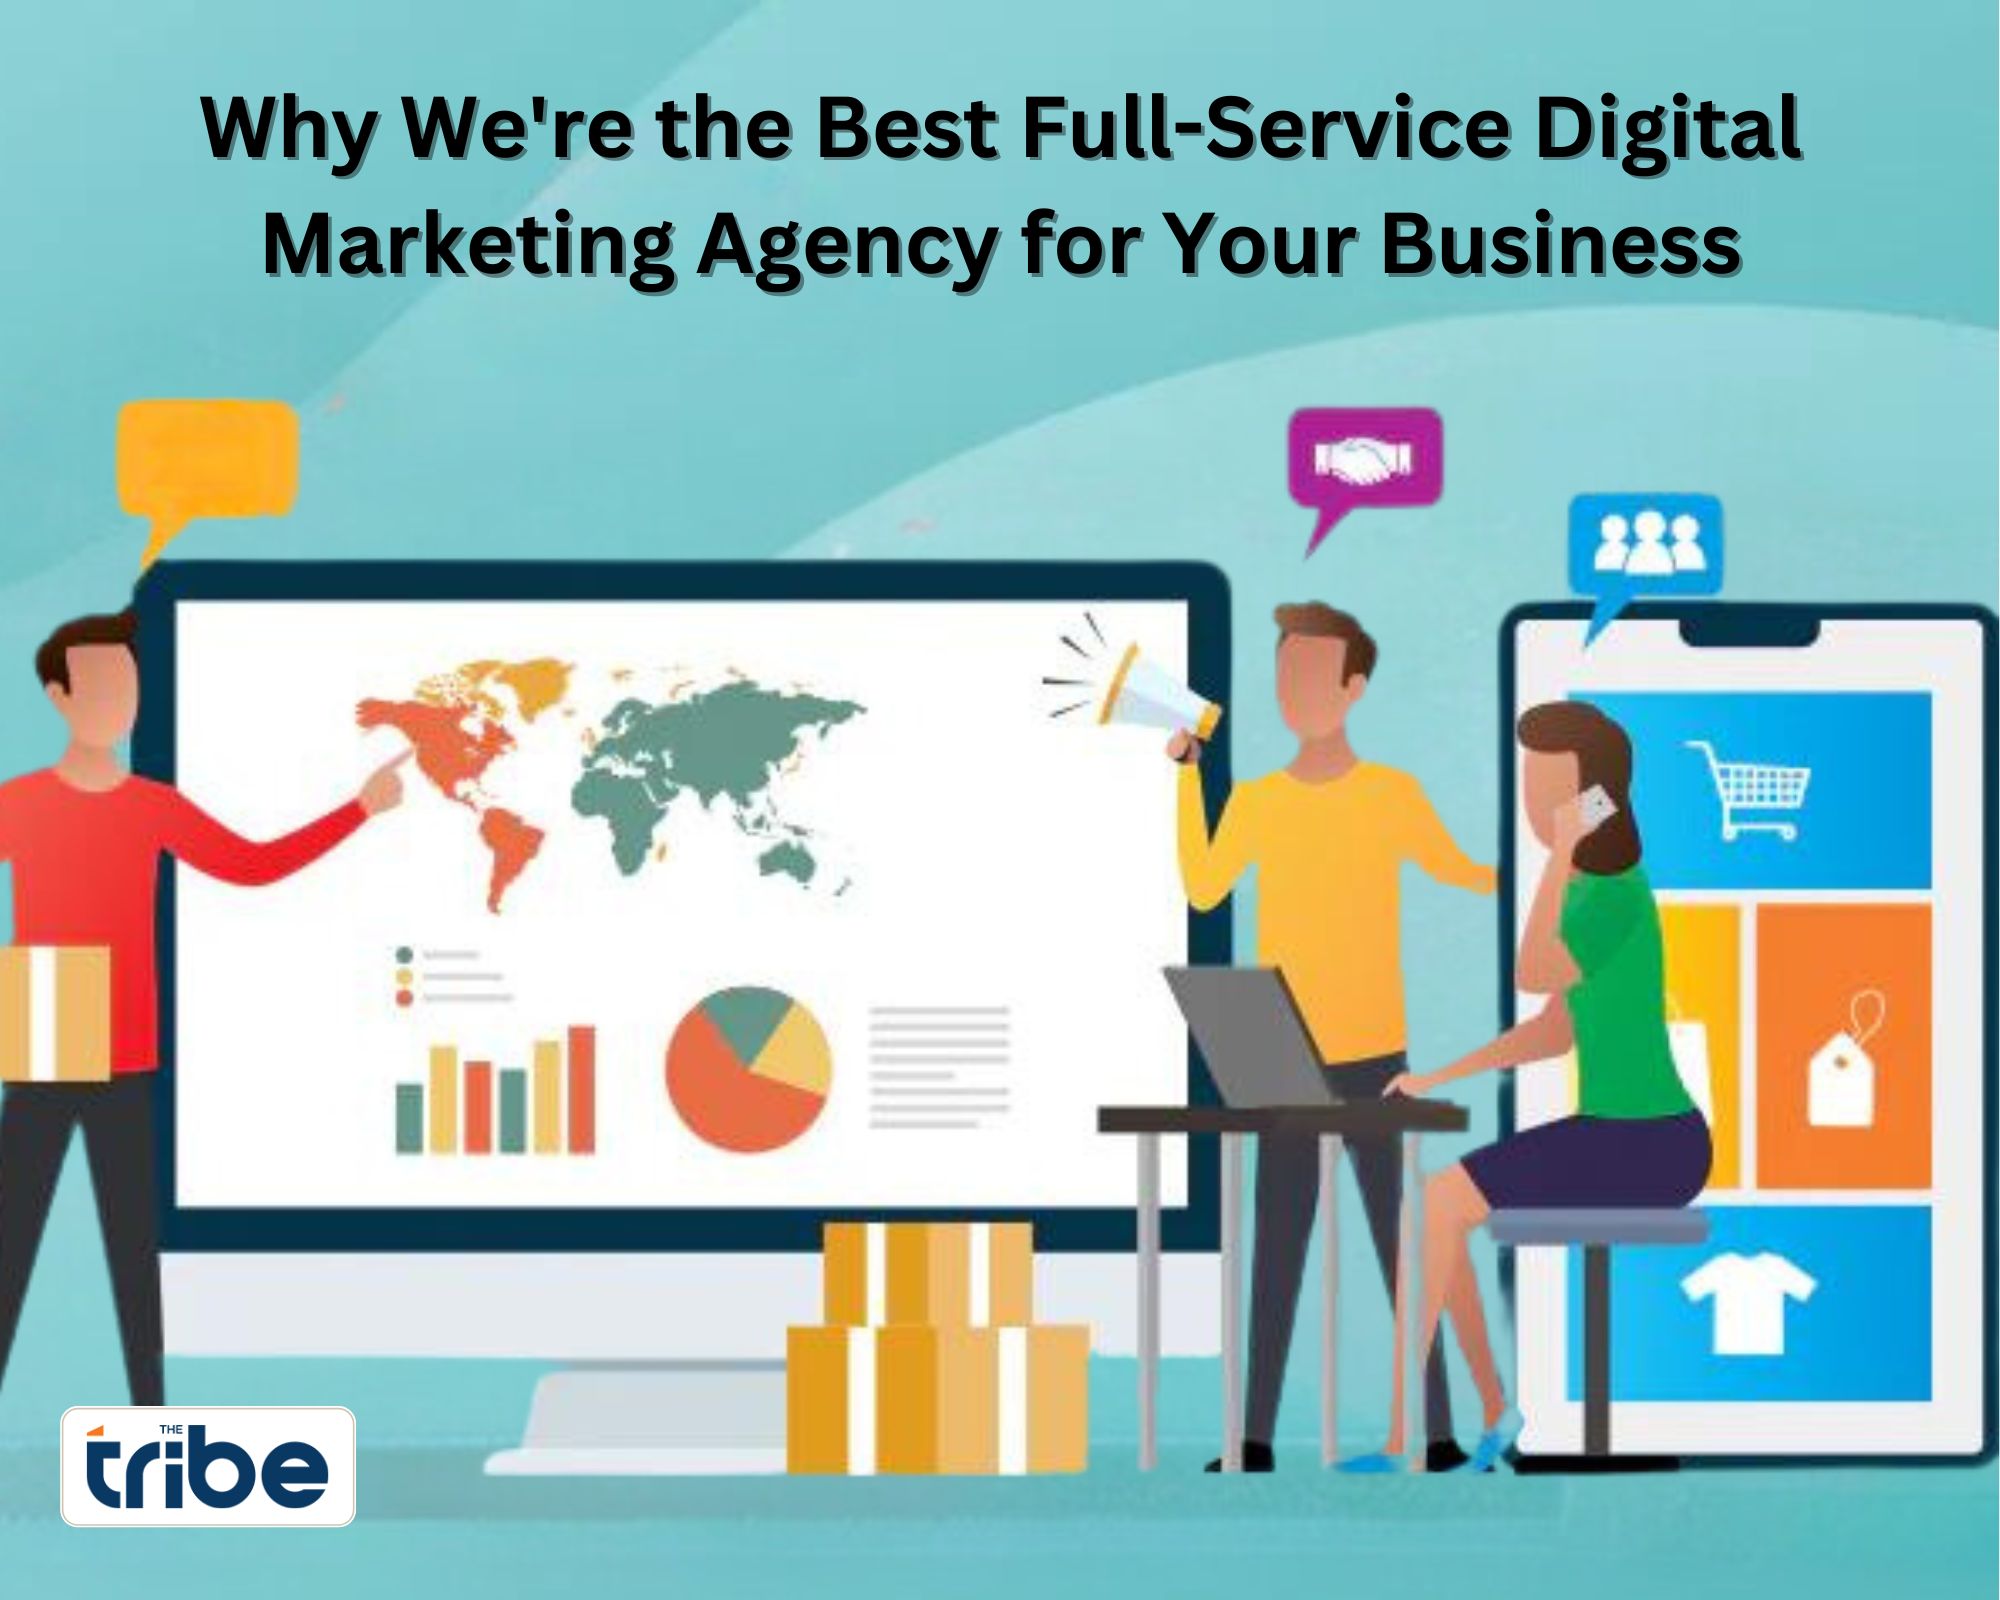 Why We're the Best Full-Service Digital Marketing Agency for Your Business​